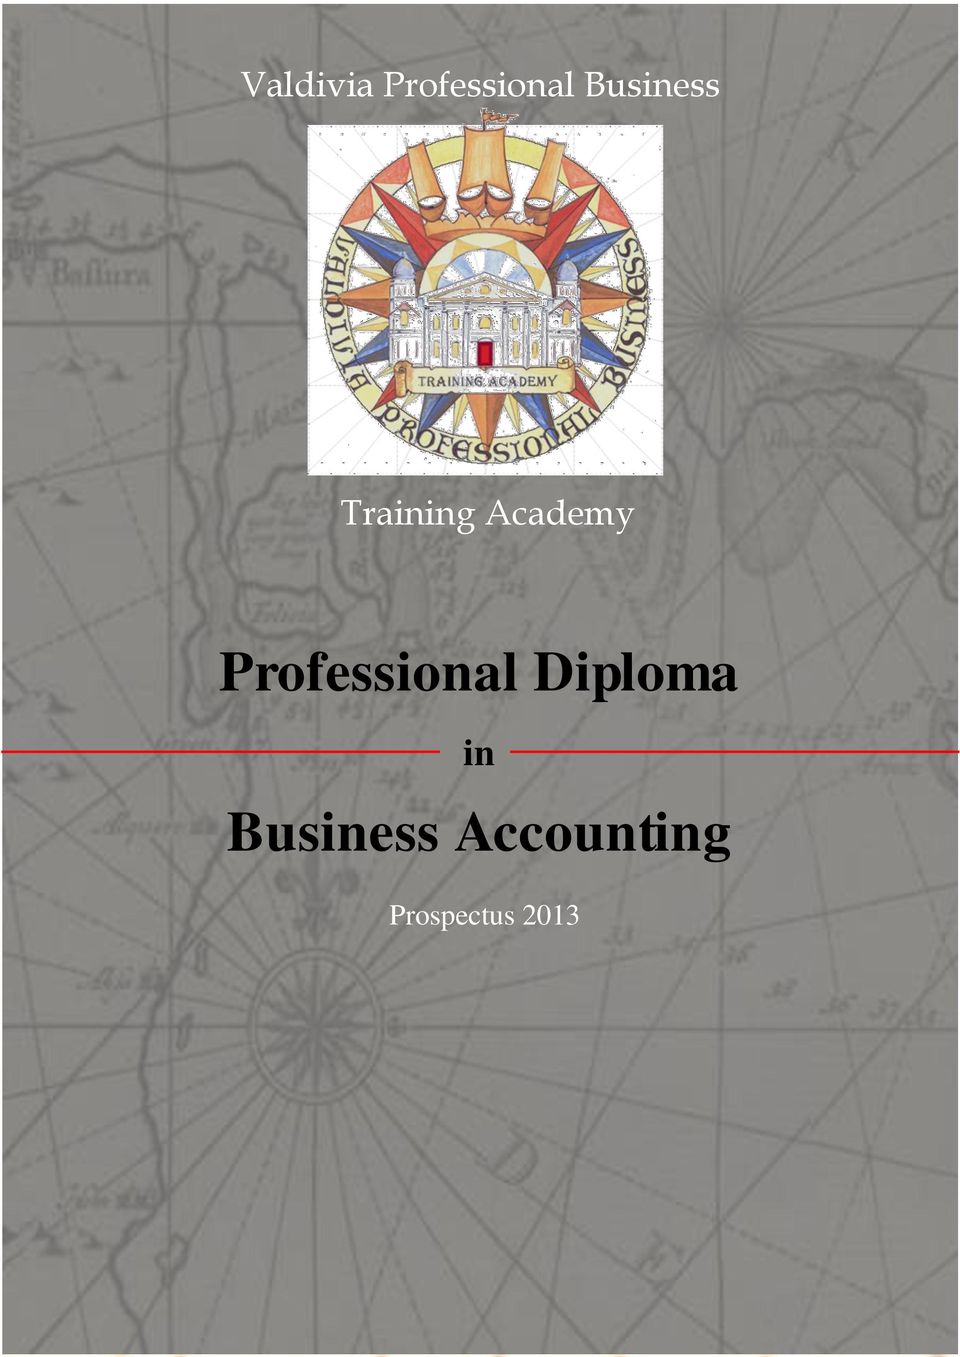 Professional Diploma in